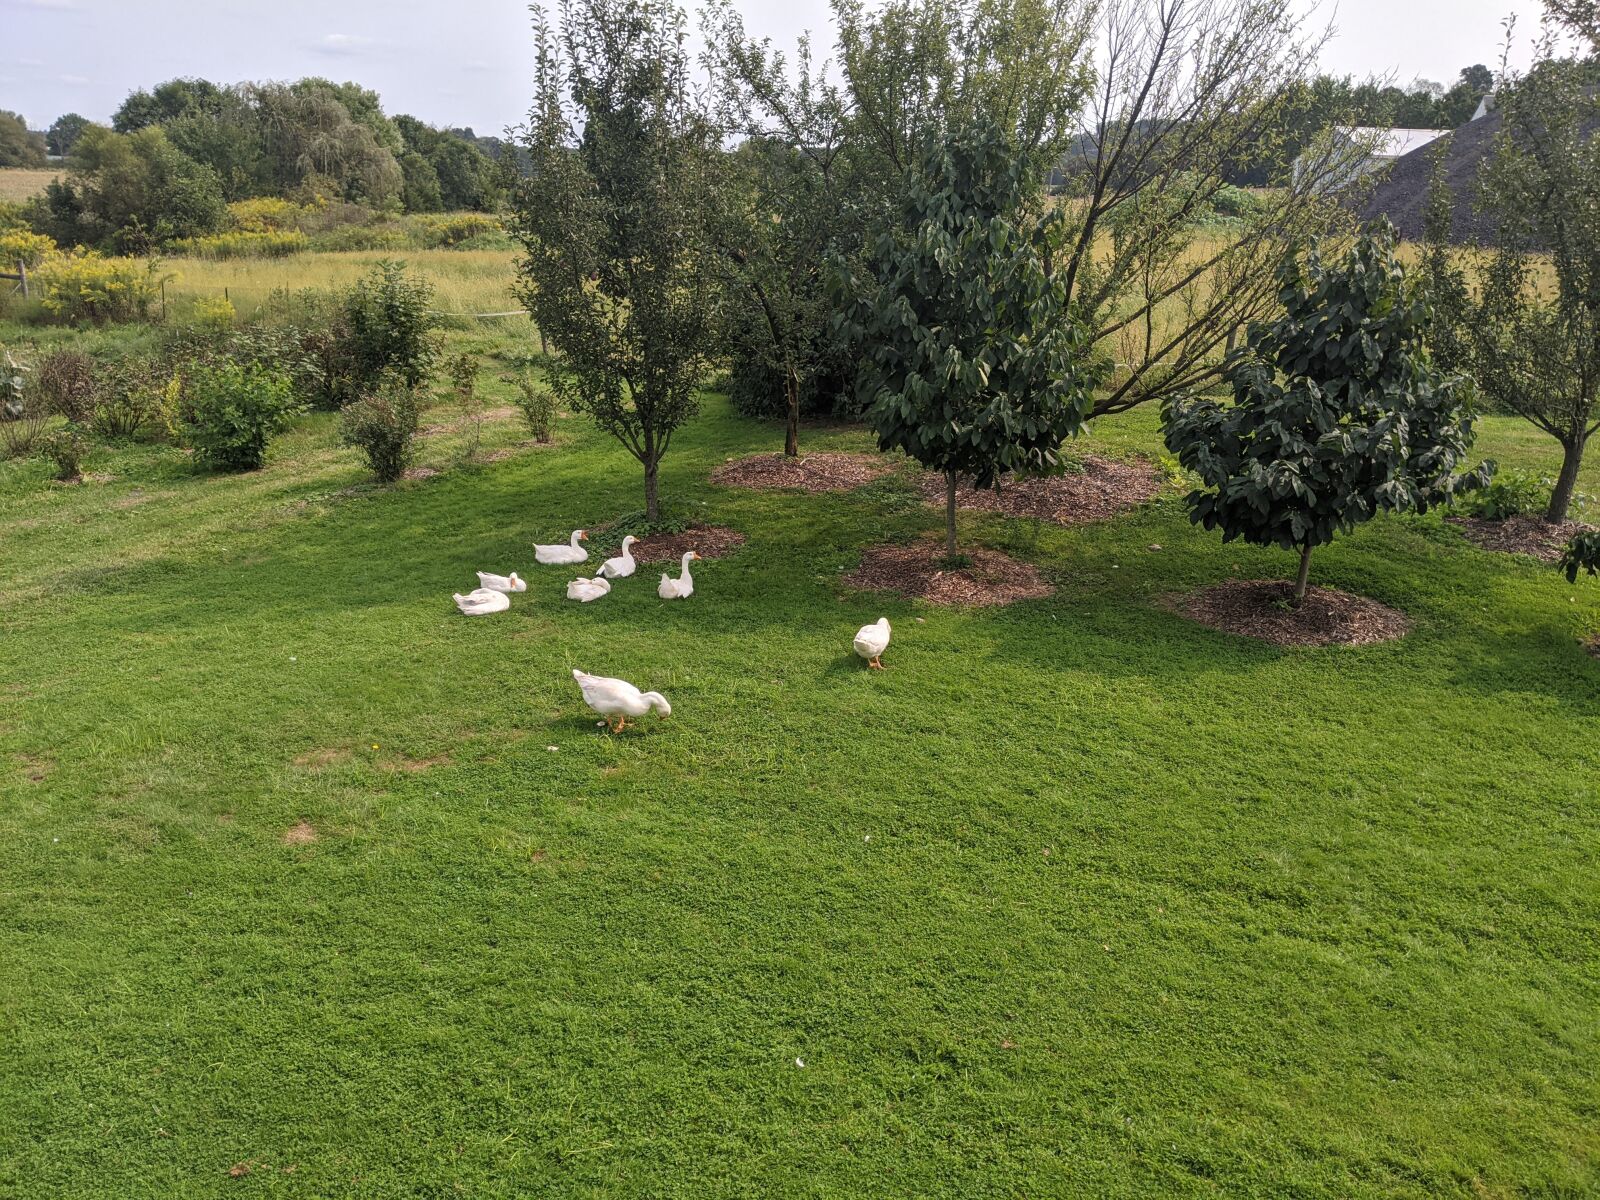 Google Pixel 3 sample photo. Geese, white geese, goose photography